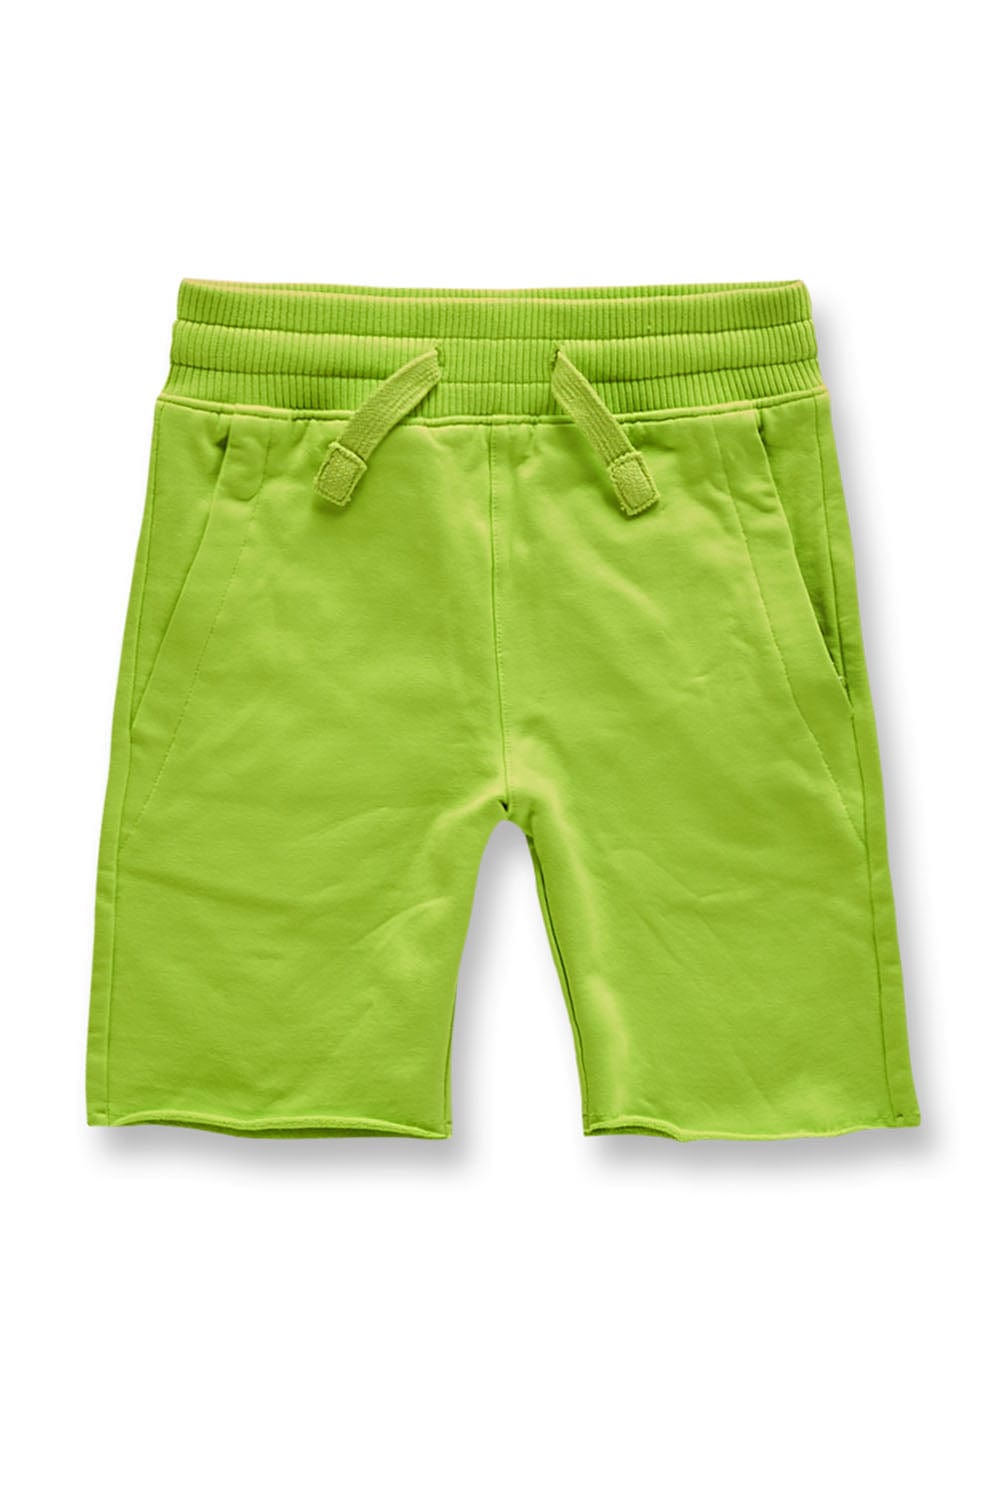 JC Kids Kids Palma French Terry Shorts (Exclusive Colors) Volt / 2